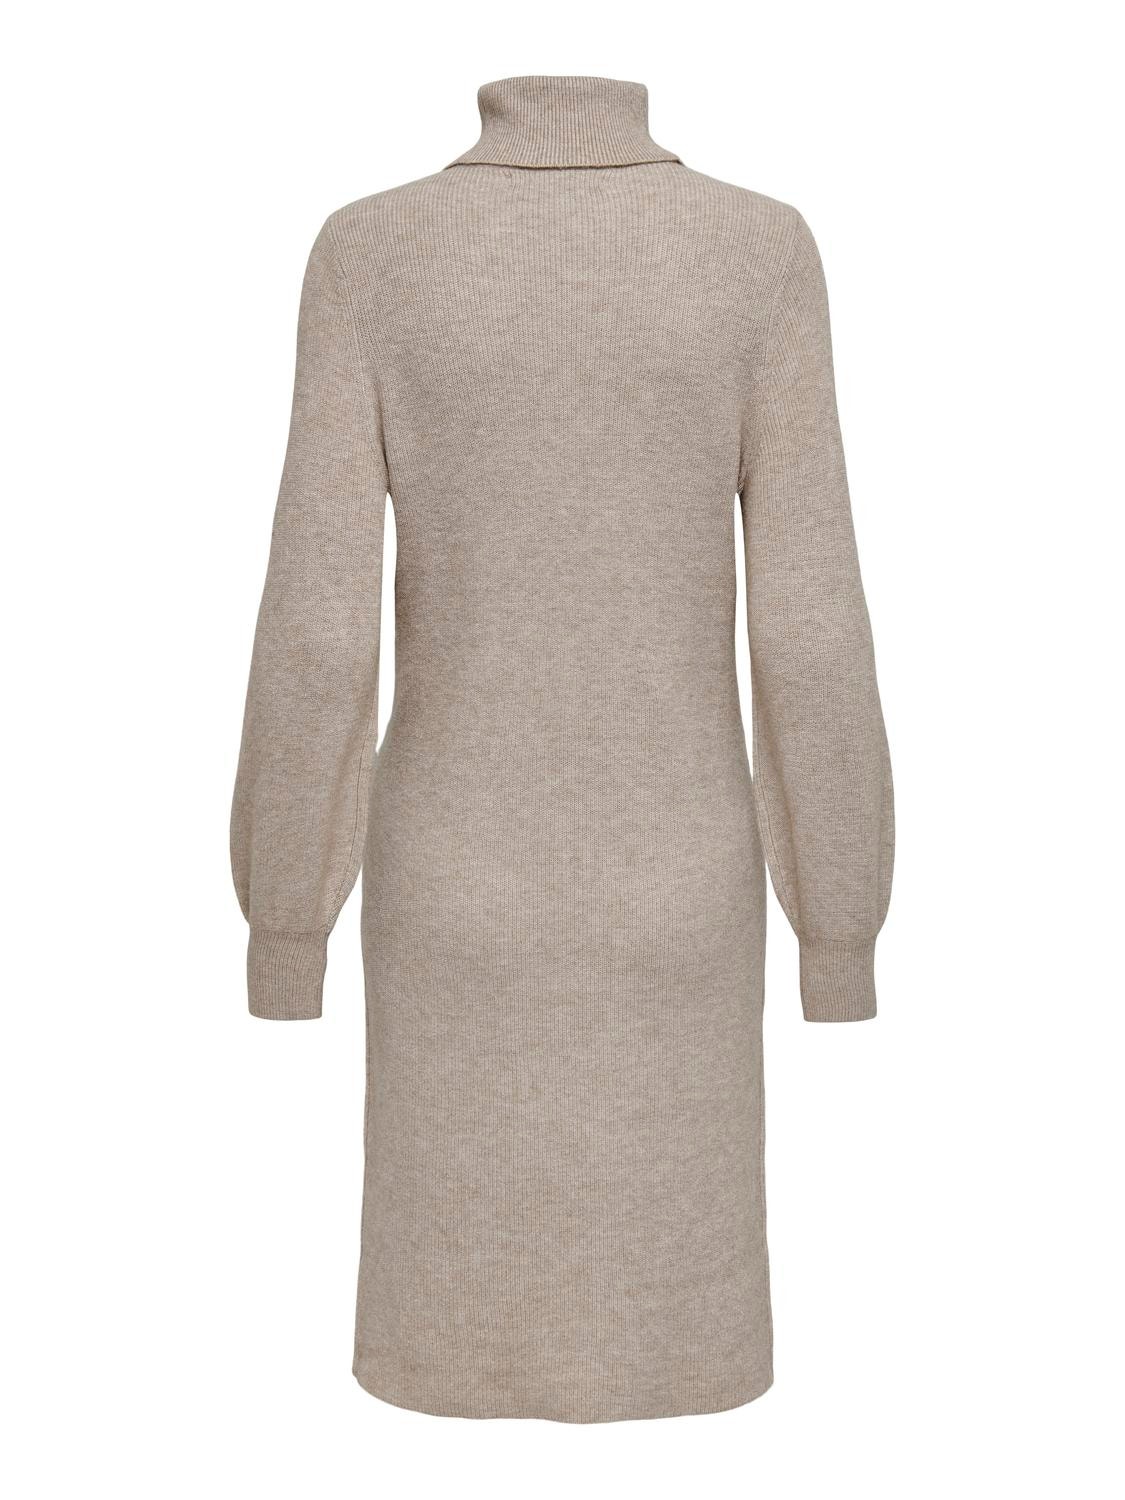 ONLY Mini dress with roll neck -Mocha Meringue - 15309197